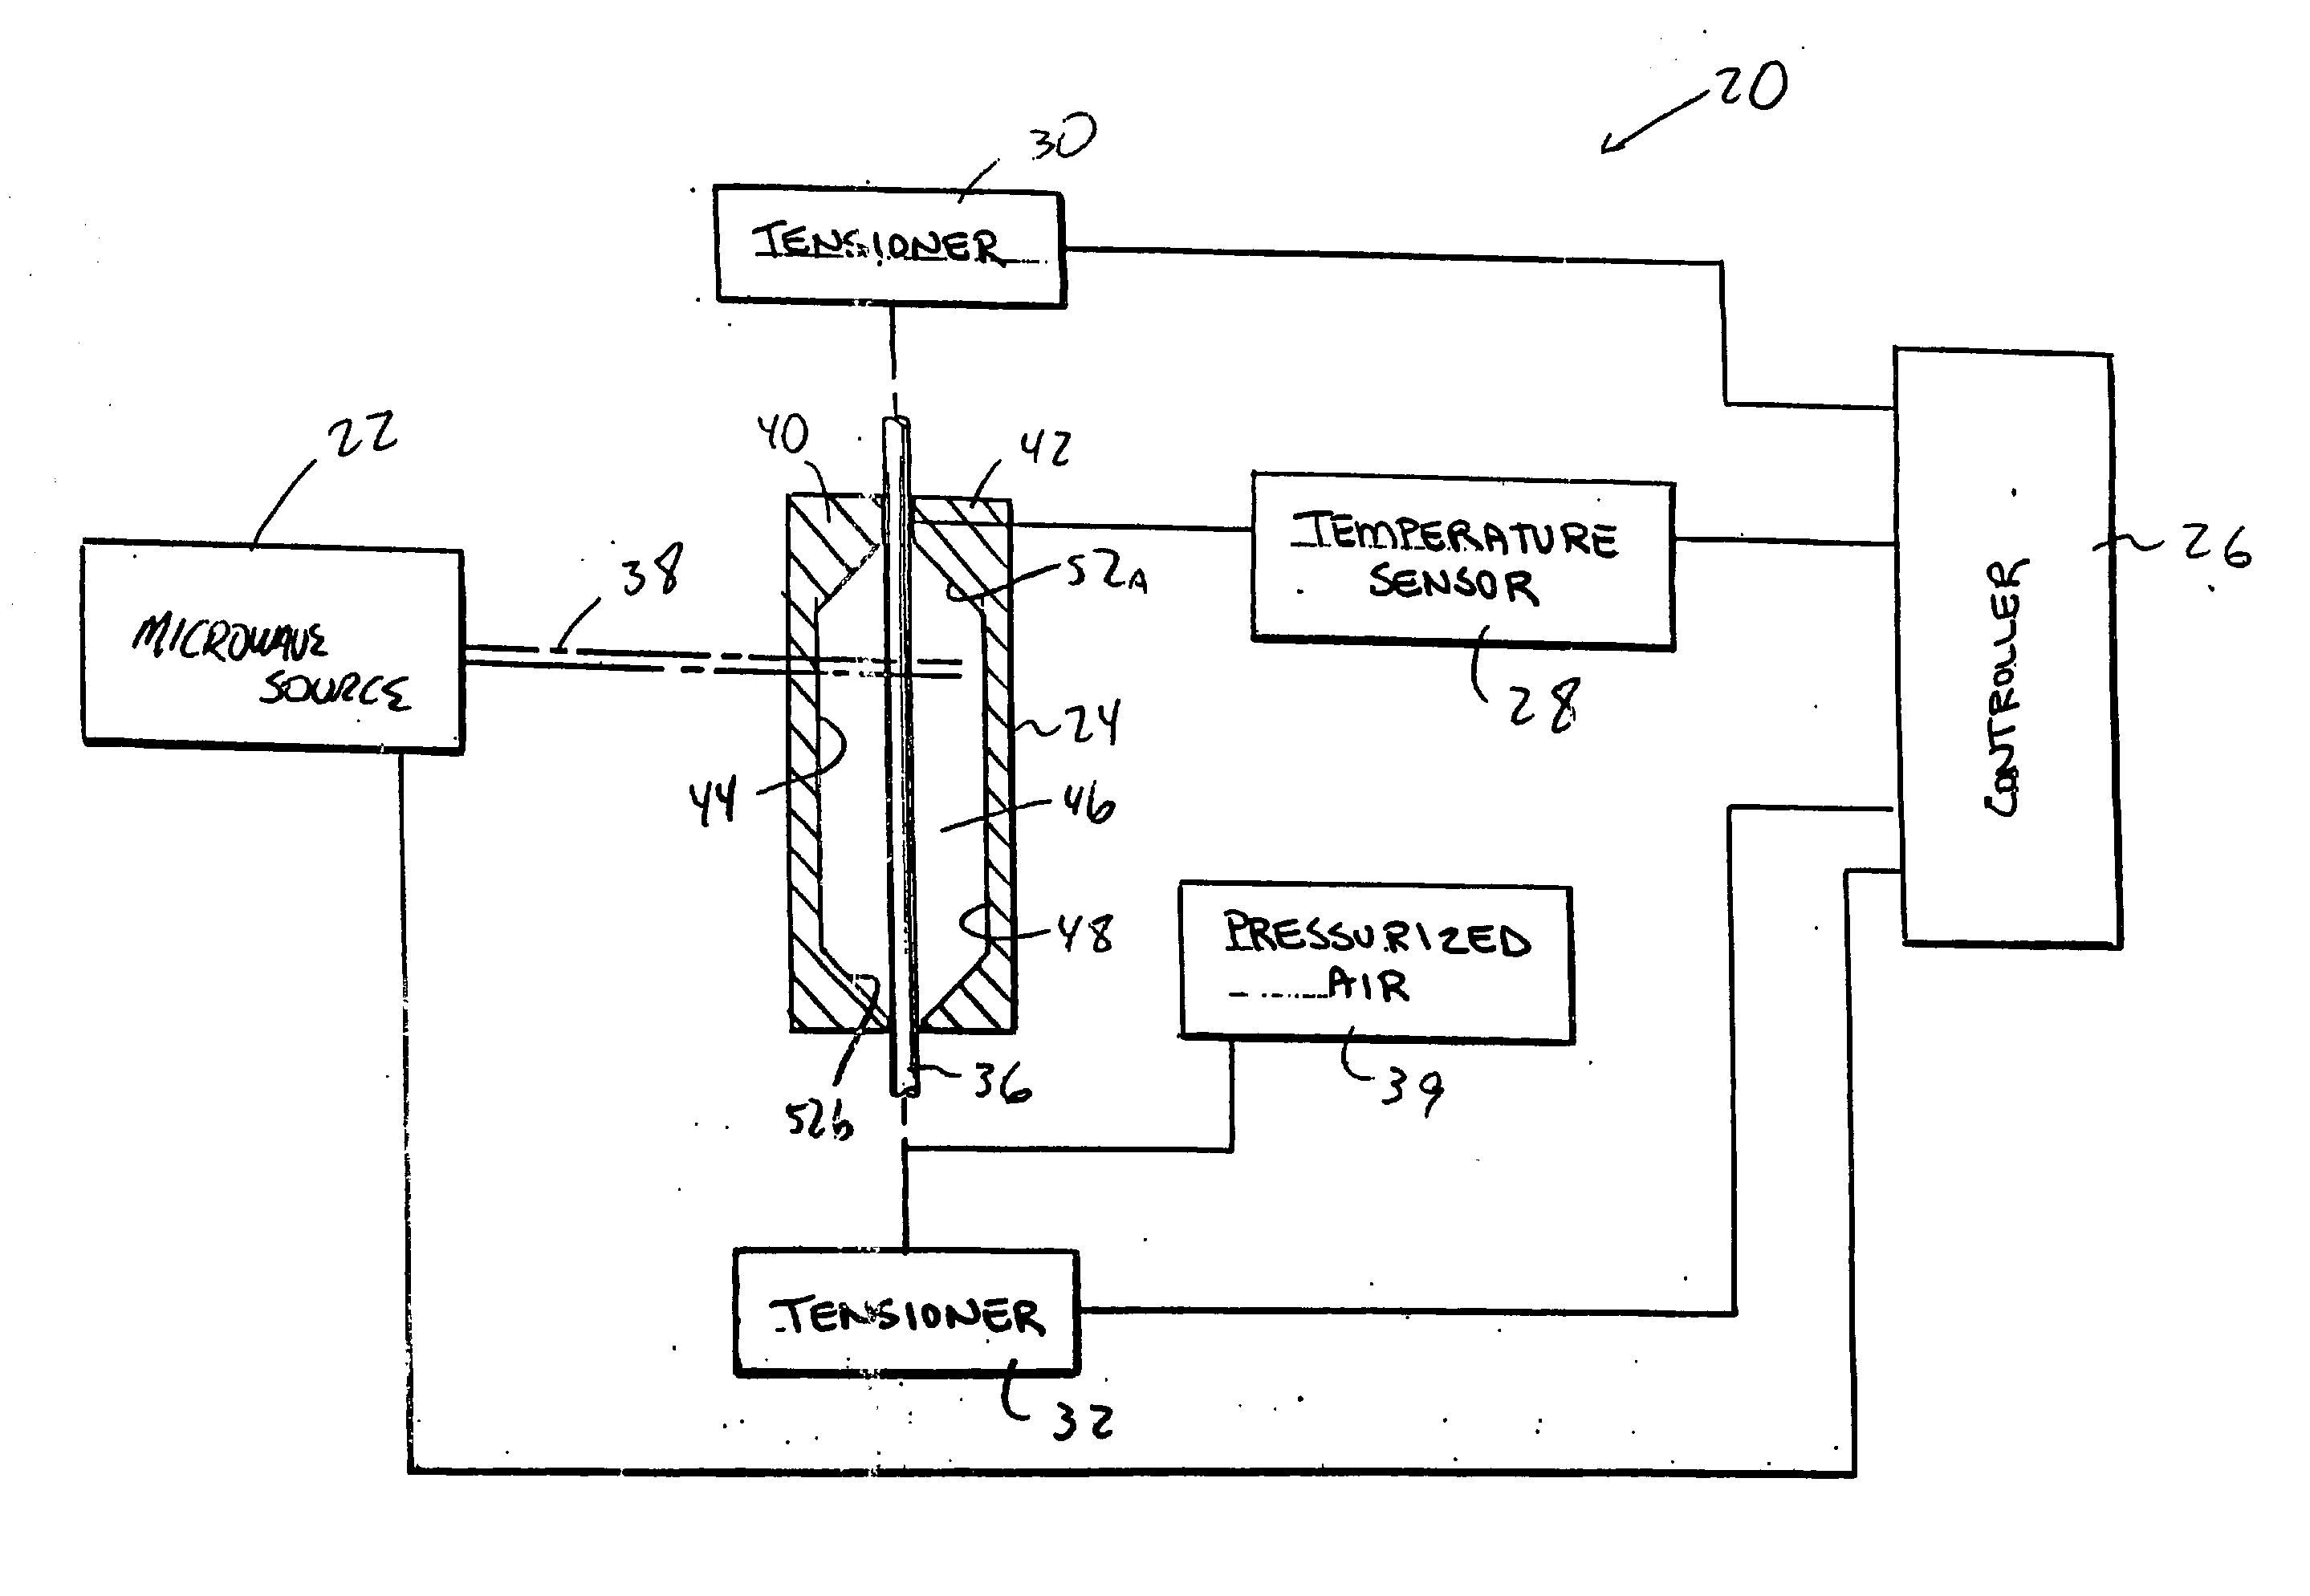 Method of manufacture medical devices employing microwave energy